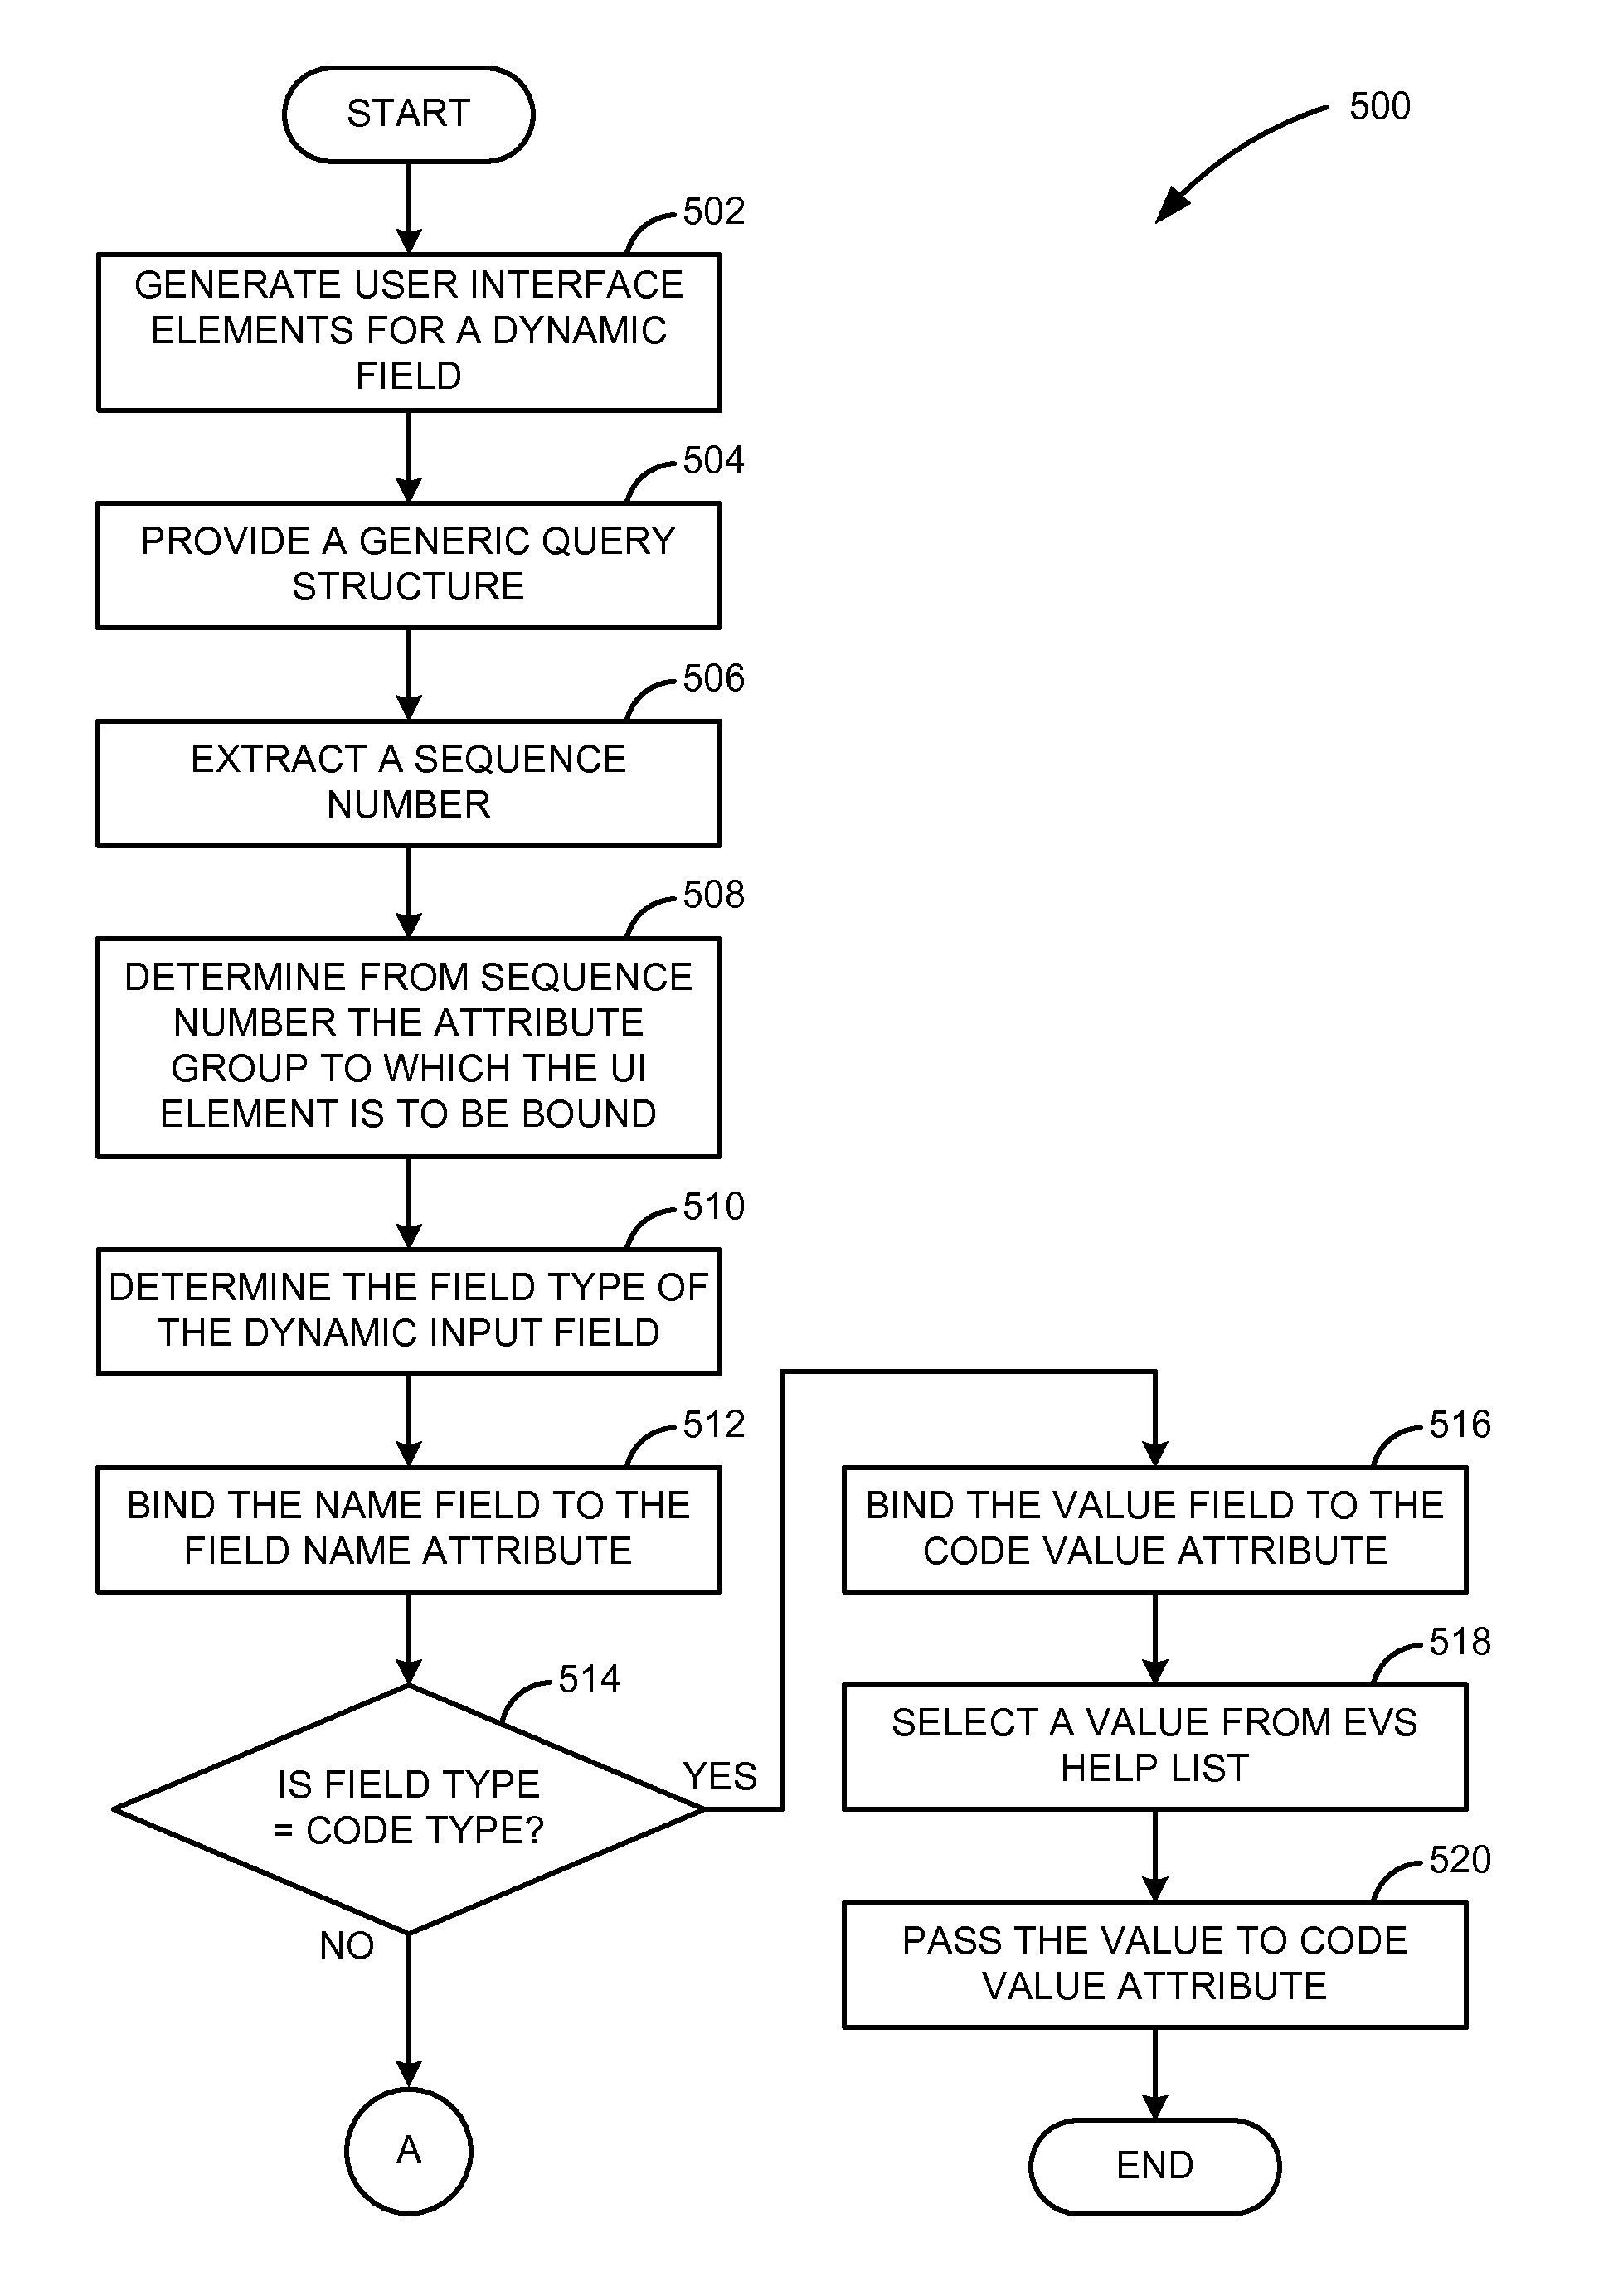 Method and system for providing value help features to input fields generated for dynamically selected columns